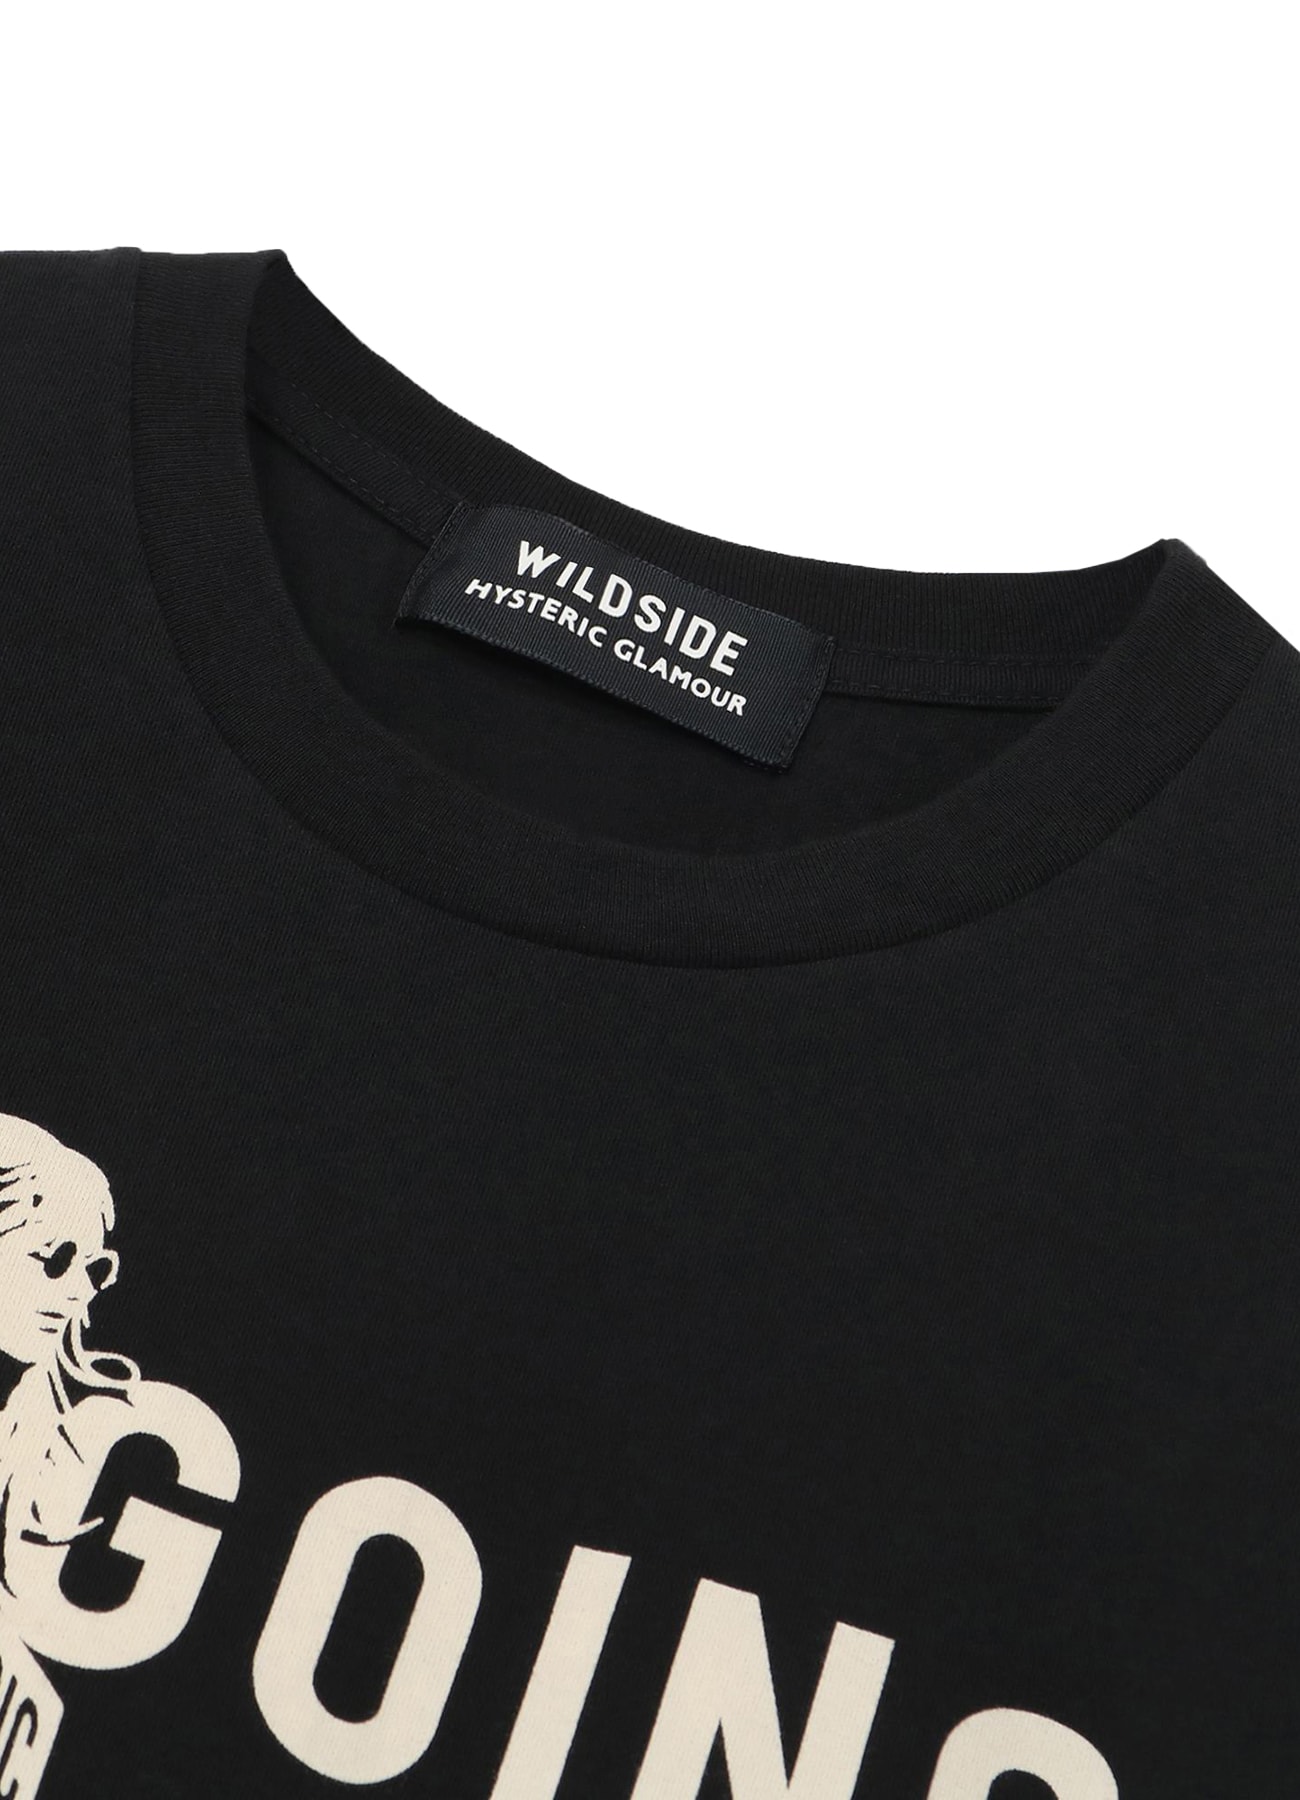 WILDSIDE × HYSTERIC GLAMOUR "GOING MY WILDSIDE" T-shirt(M BLACK